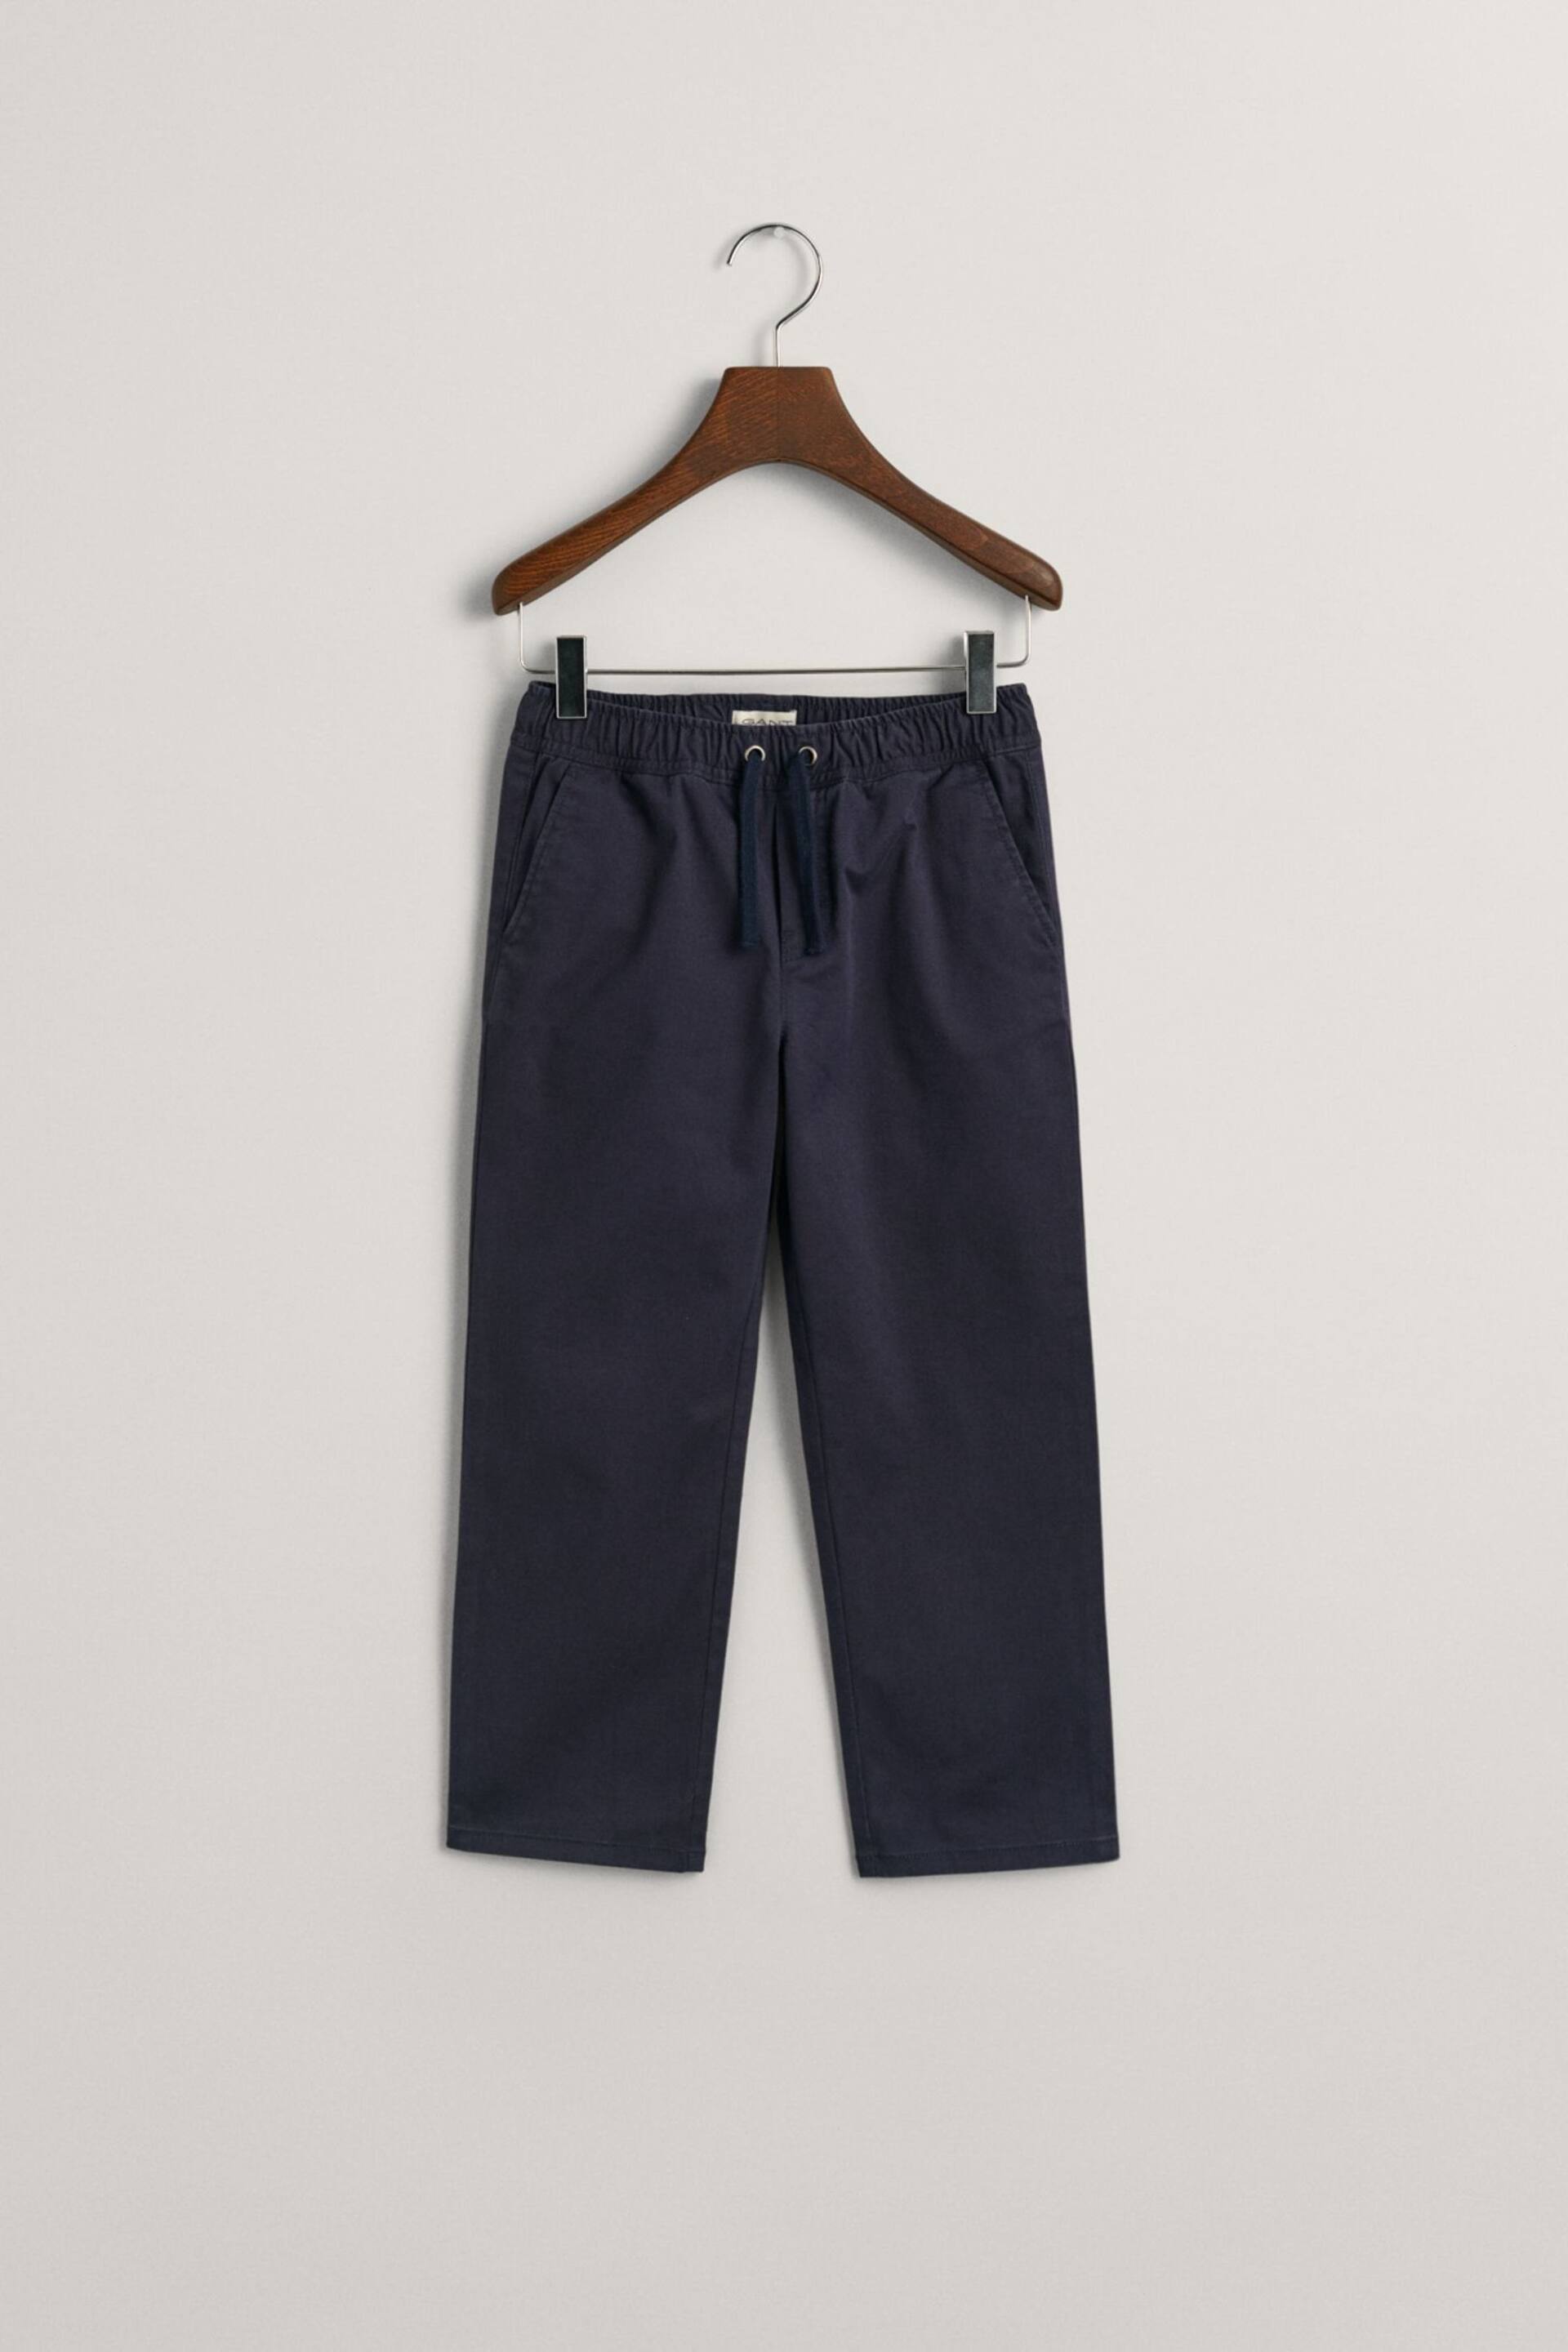 GANT Kids Woven Pull-On Trousers - Image 1 of 3